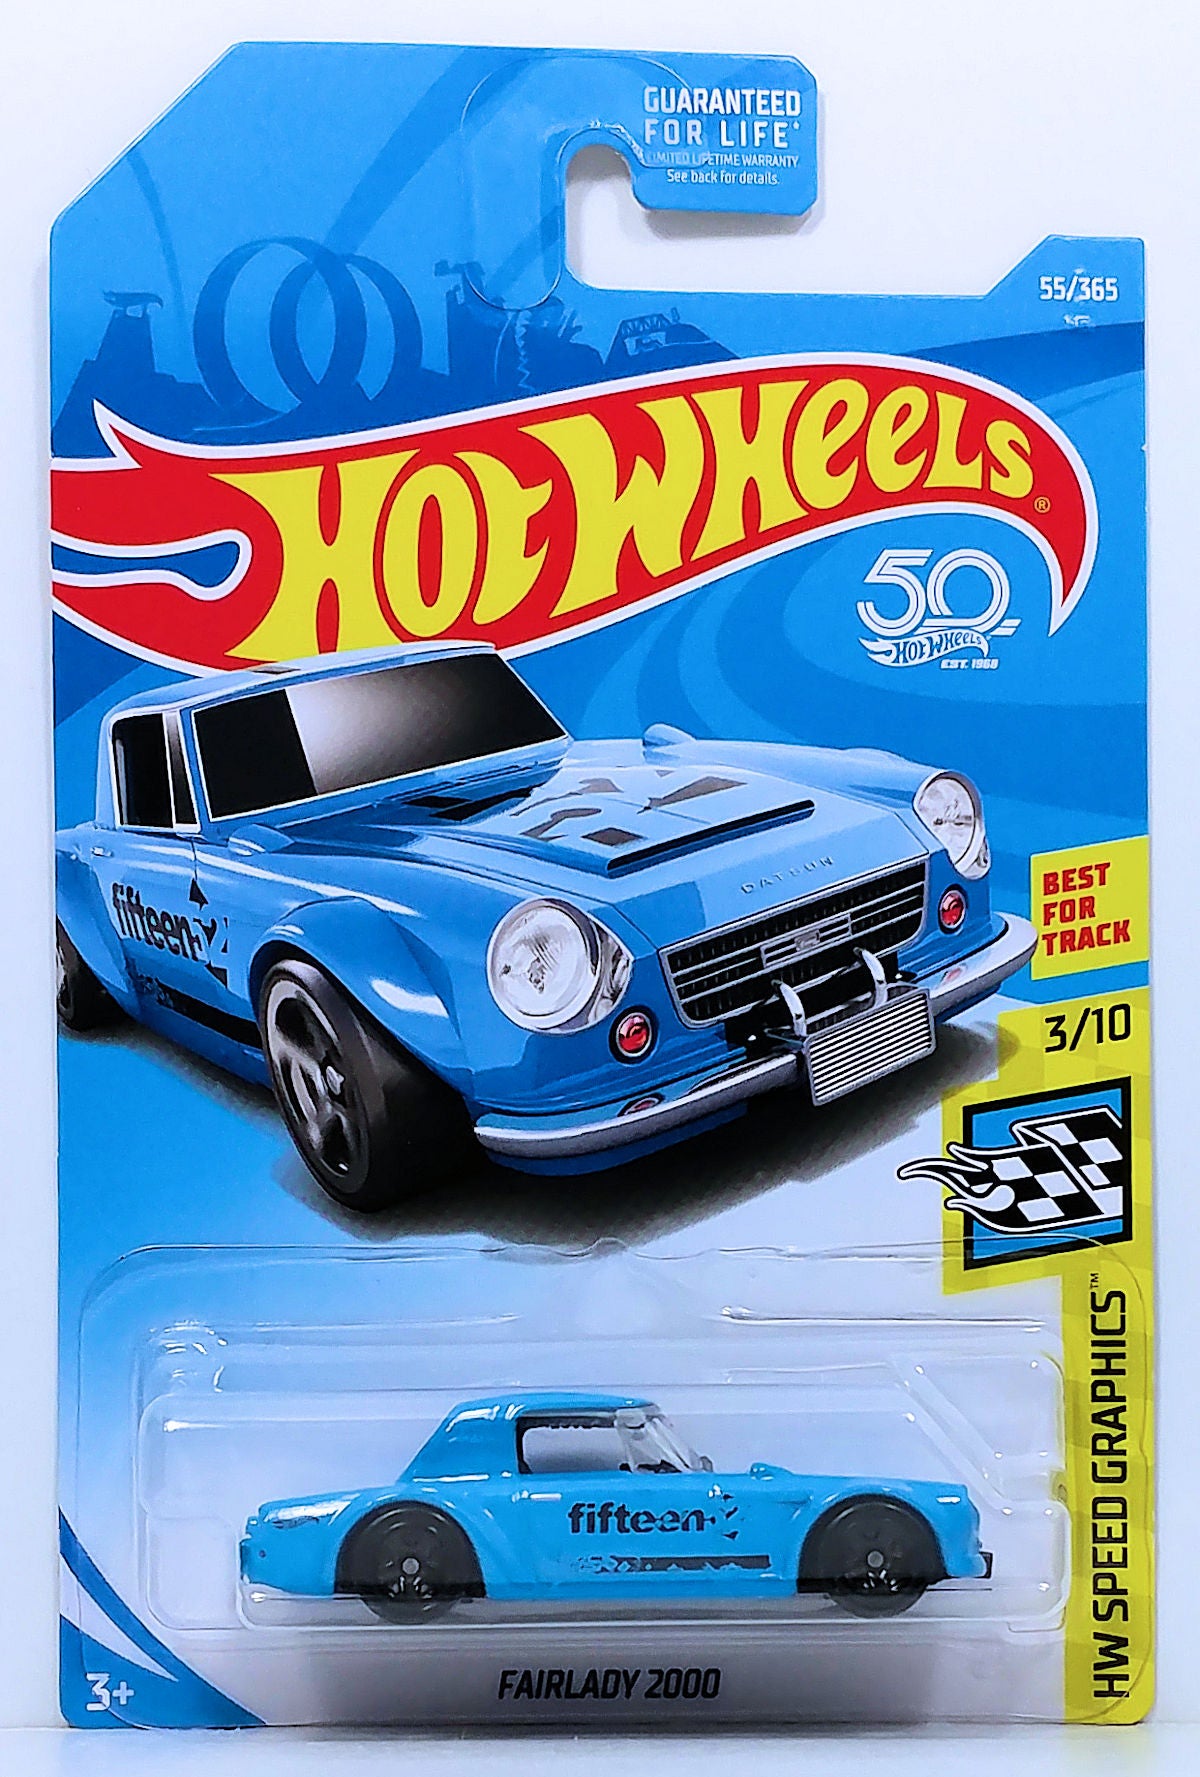 Hot Wheels 2018 - Collector # 055/365 - HW Speed Graphics 3/10 - Fairlady 2000 - Blue - USA